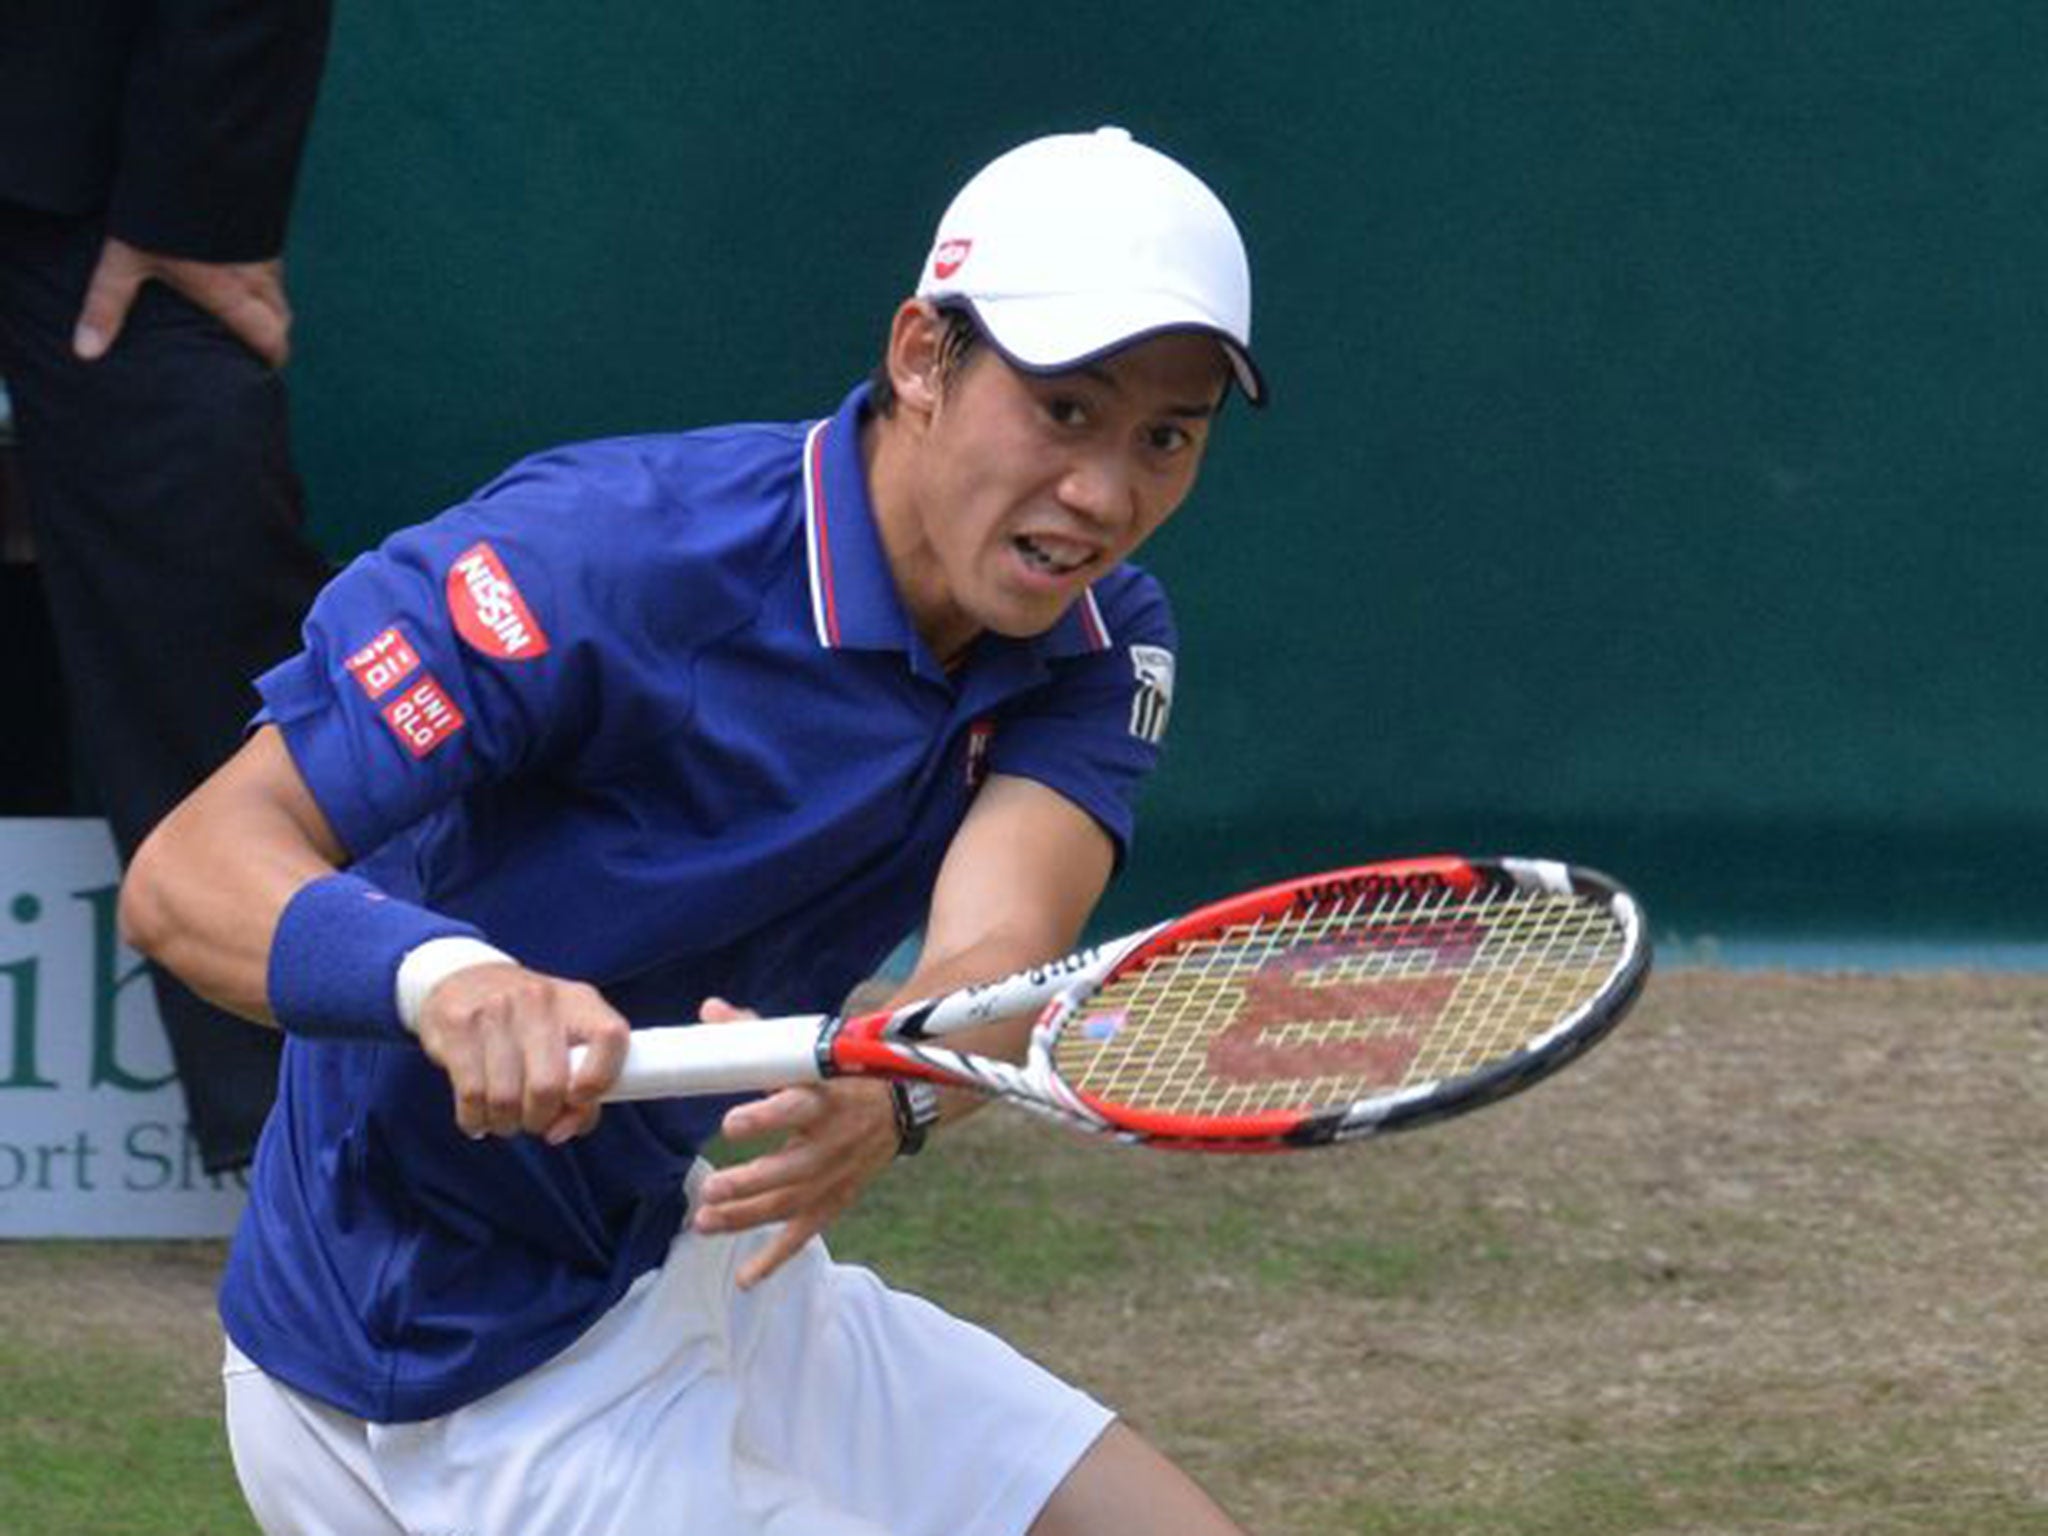 Kei Nishikori has beaten Roger Federer this year and reached the final of the Madrid Masters recently